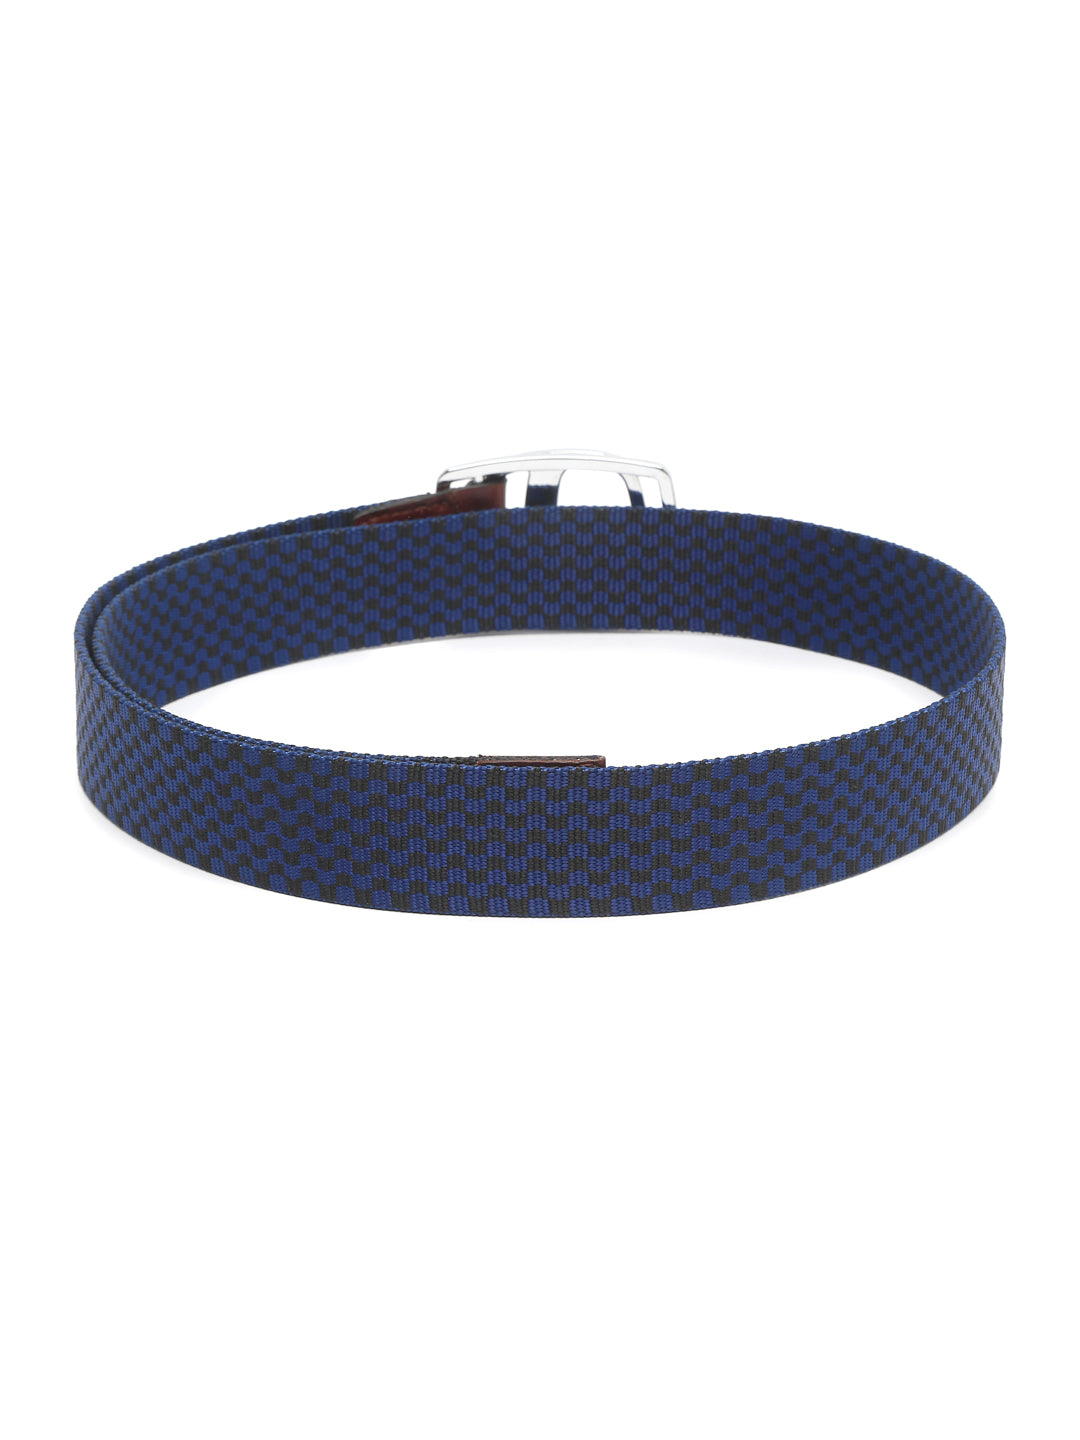 BRAND NEW* Louis Vuitton Belt 32-34 never before worn for Sale in